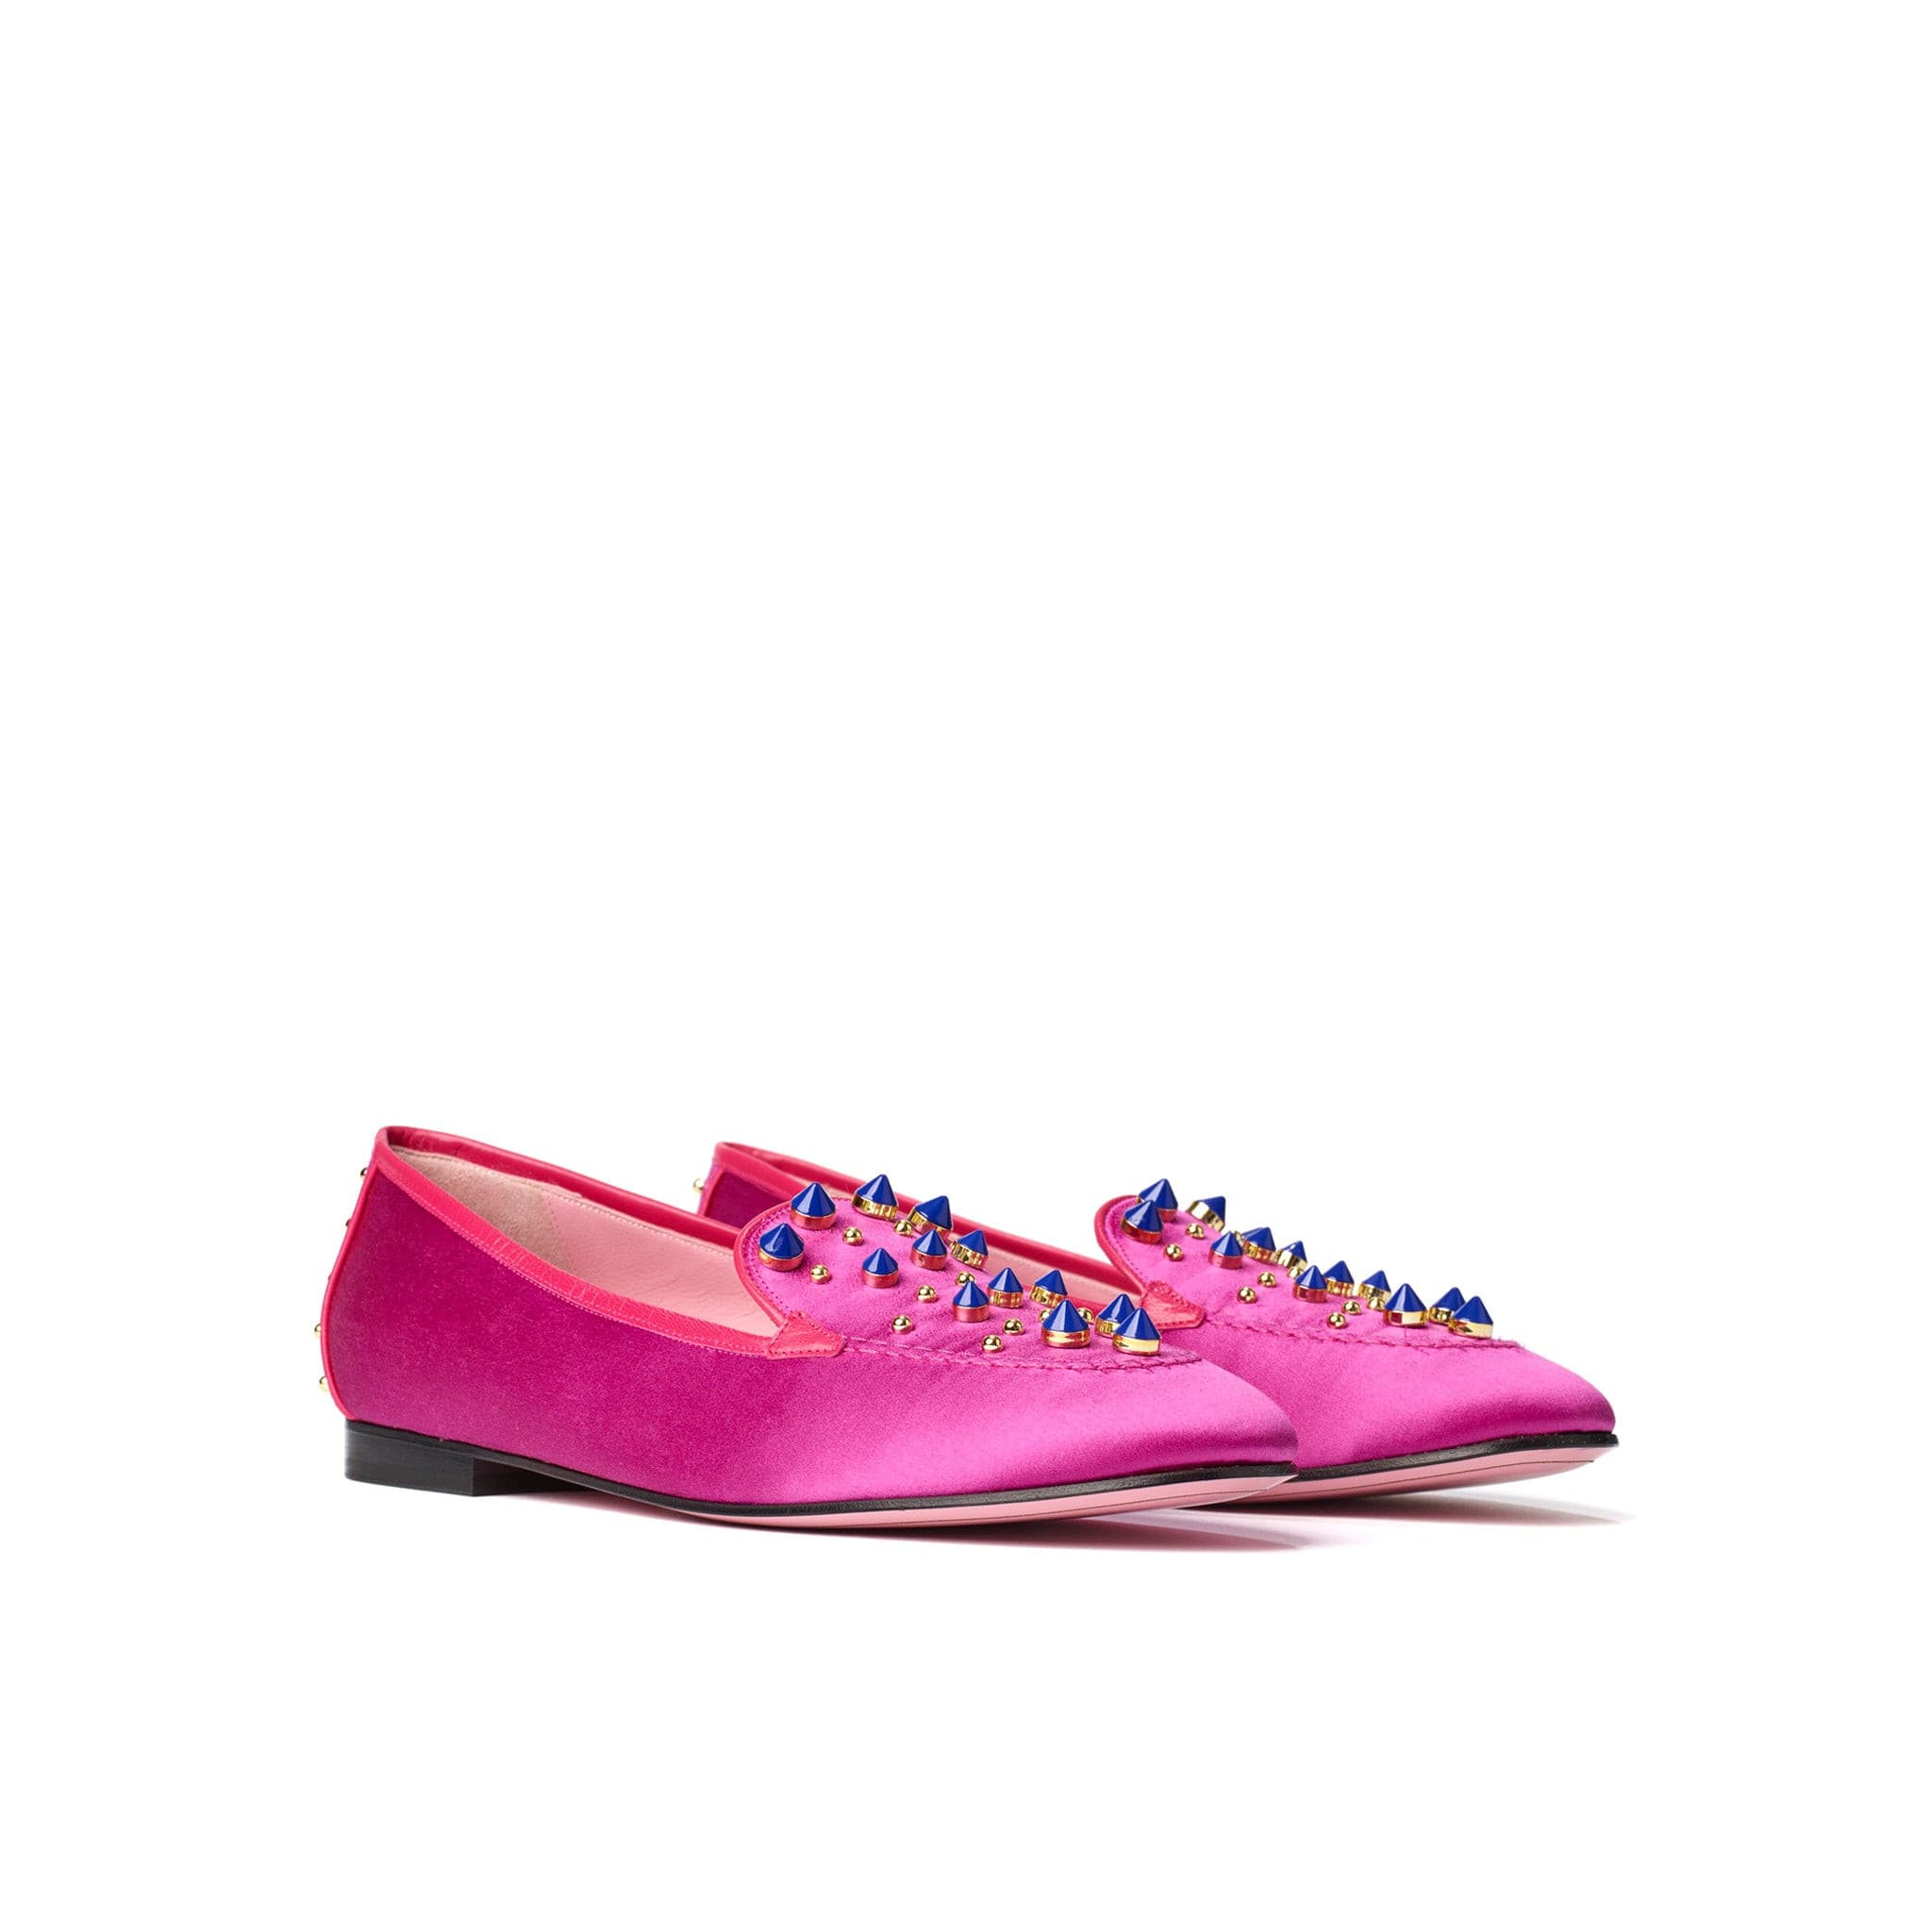 Phare Studded loafer in magenta silk satin with blue and gold studs 3/4 view 